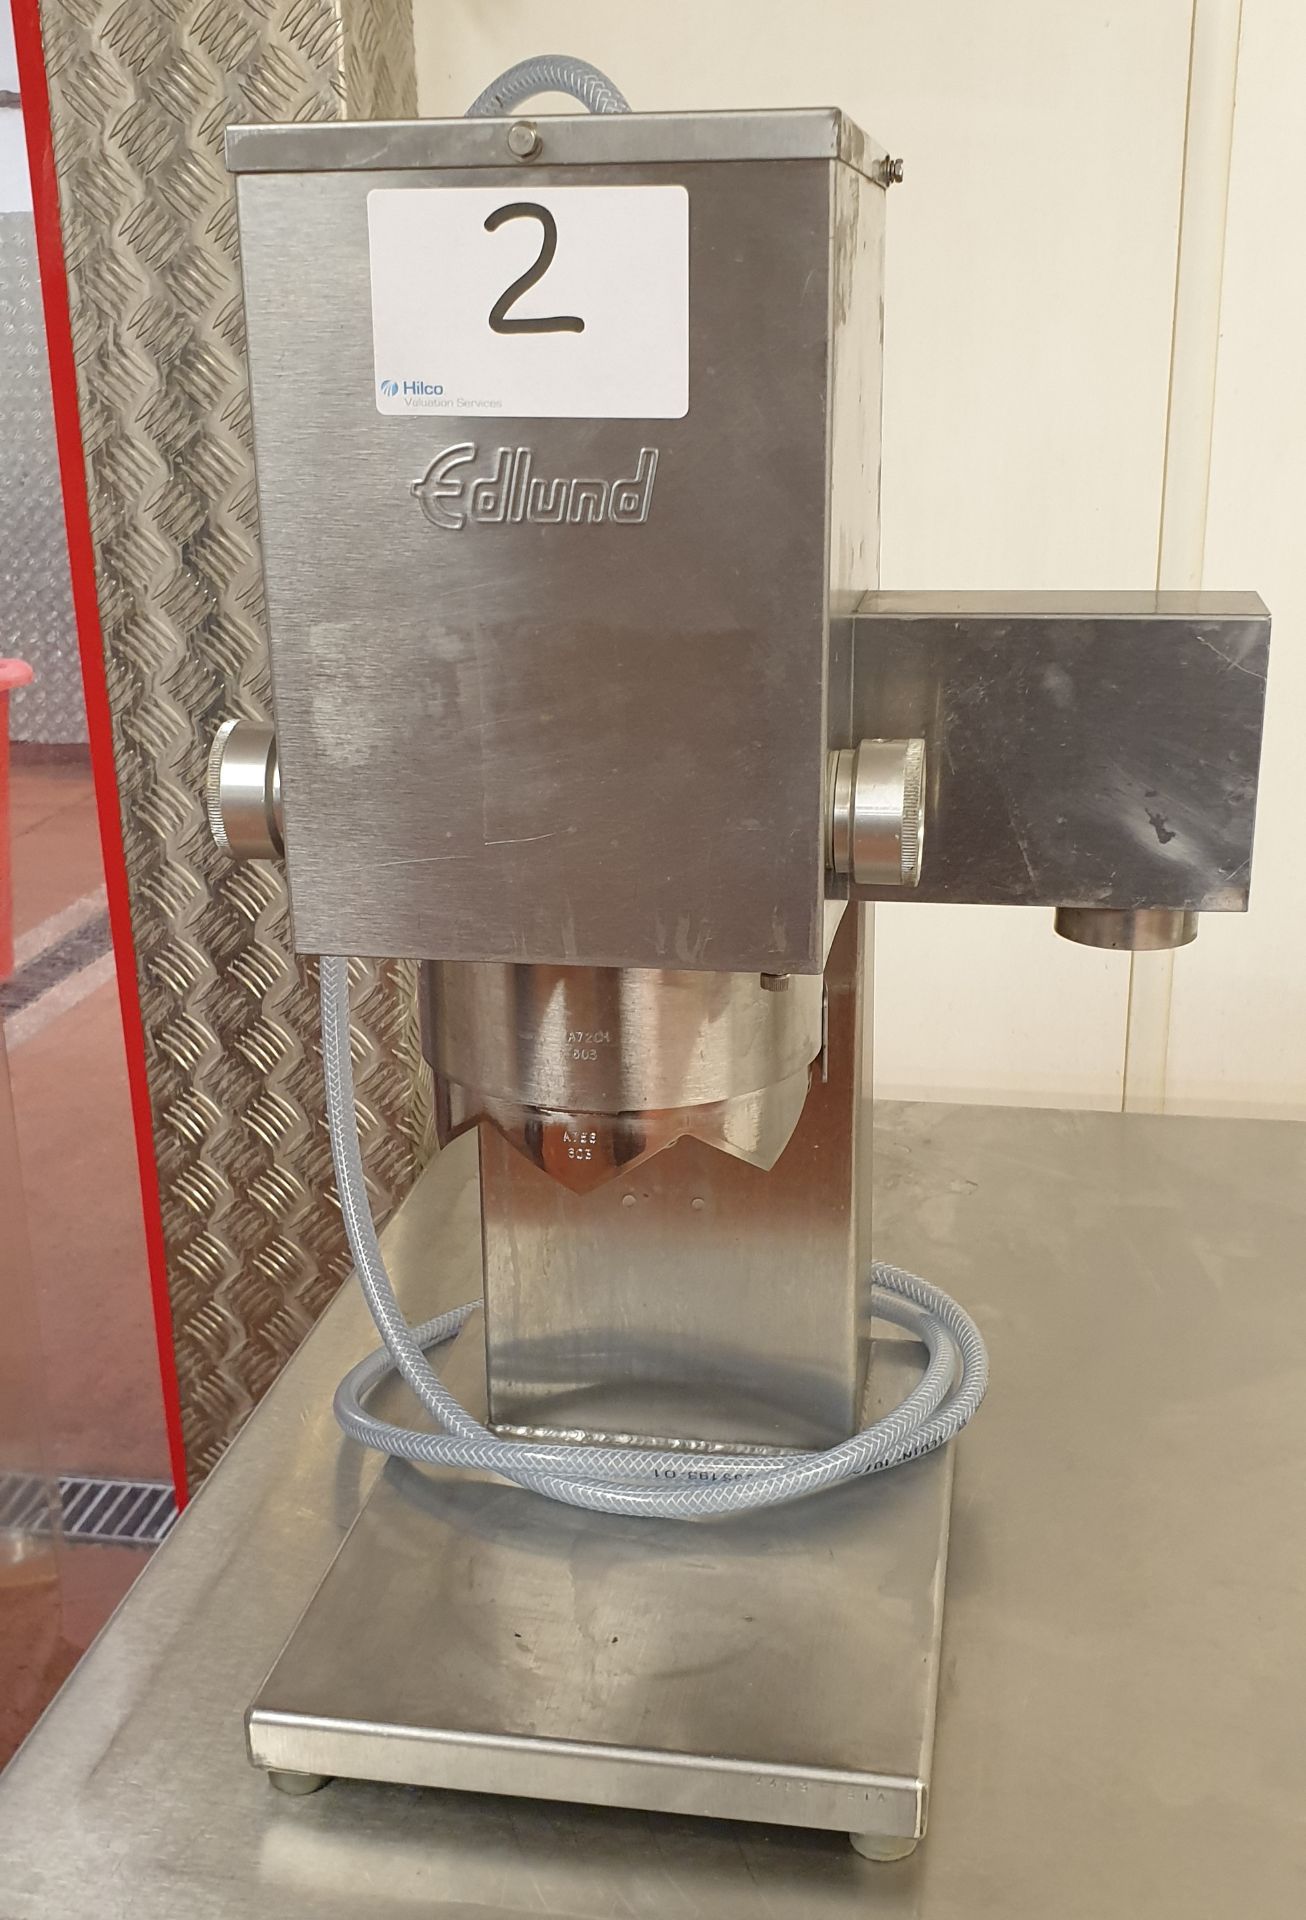 Edlund 610 Commercial Can Opener